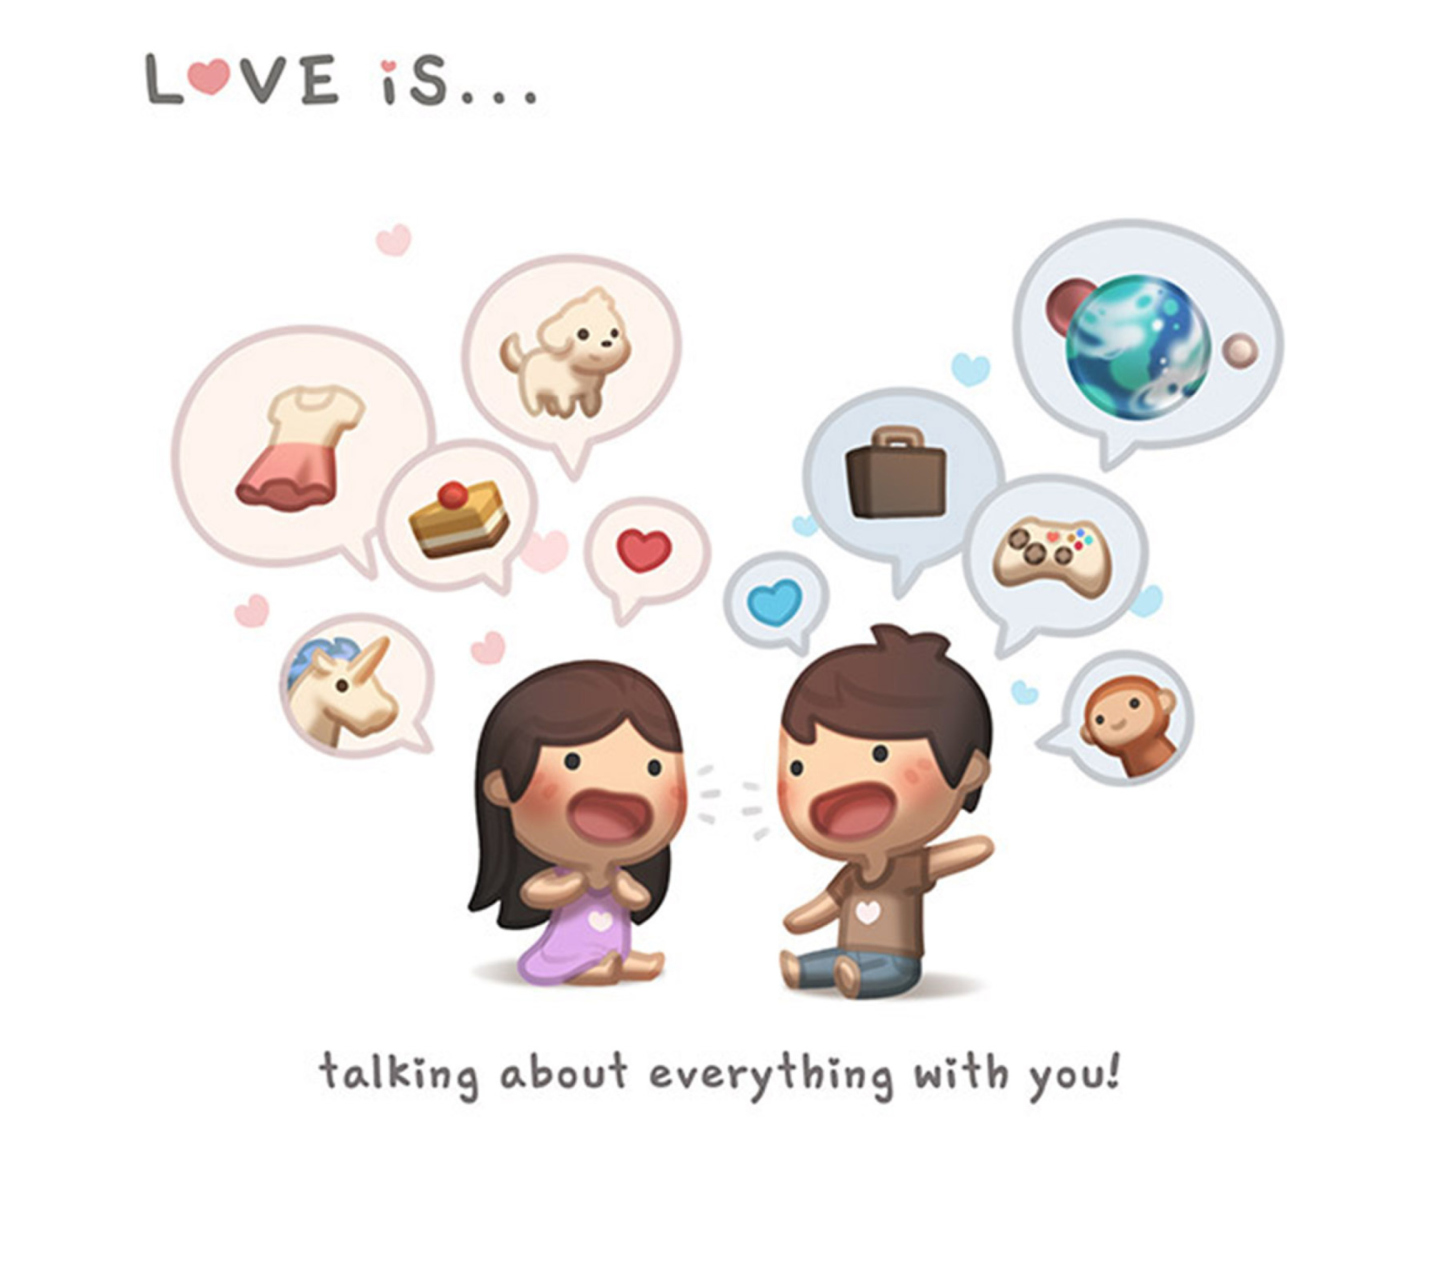 Love Is - Talking About Everything With You wallpaper 1440x1280